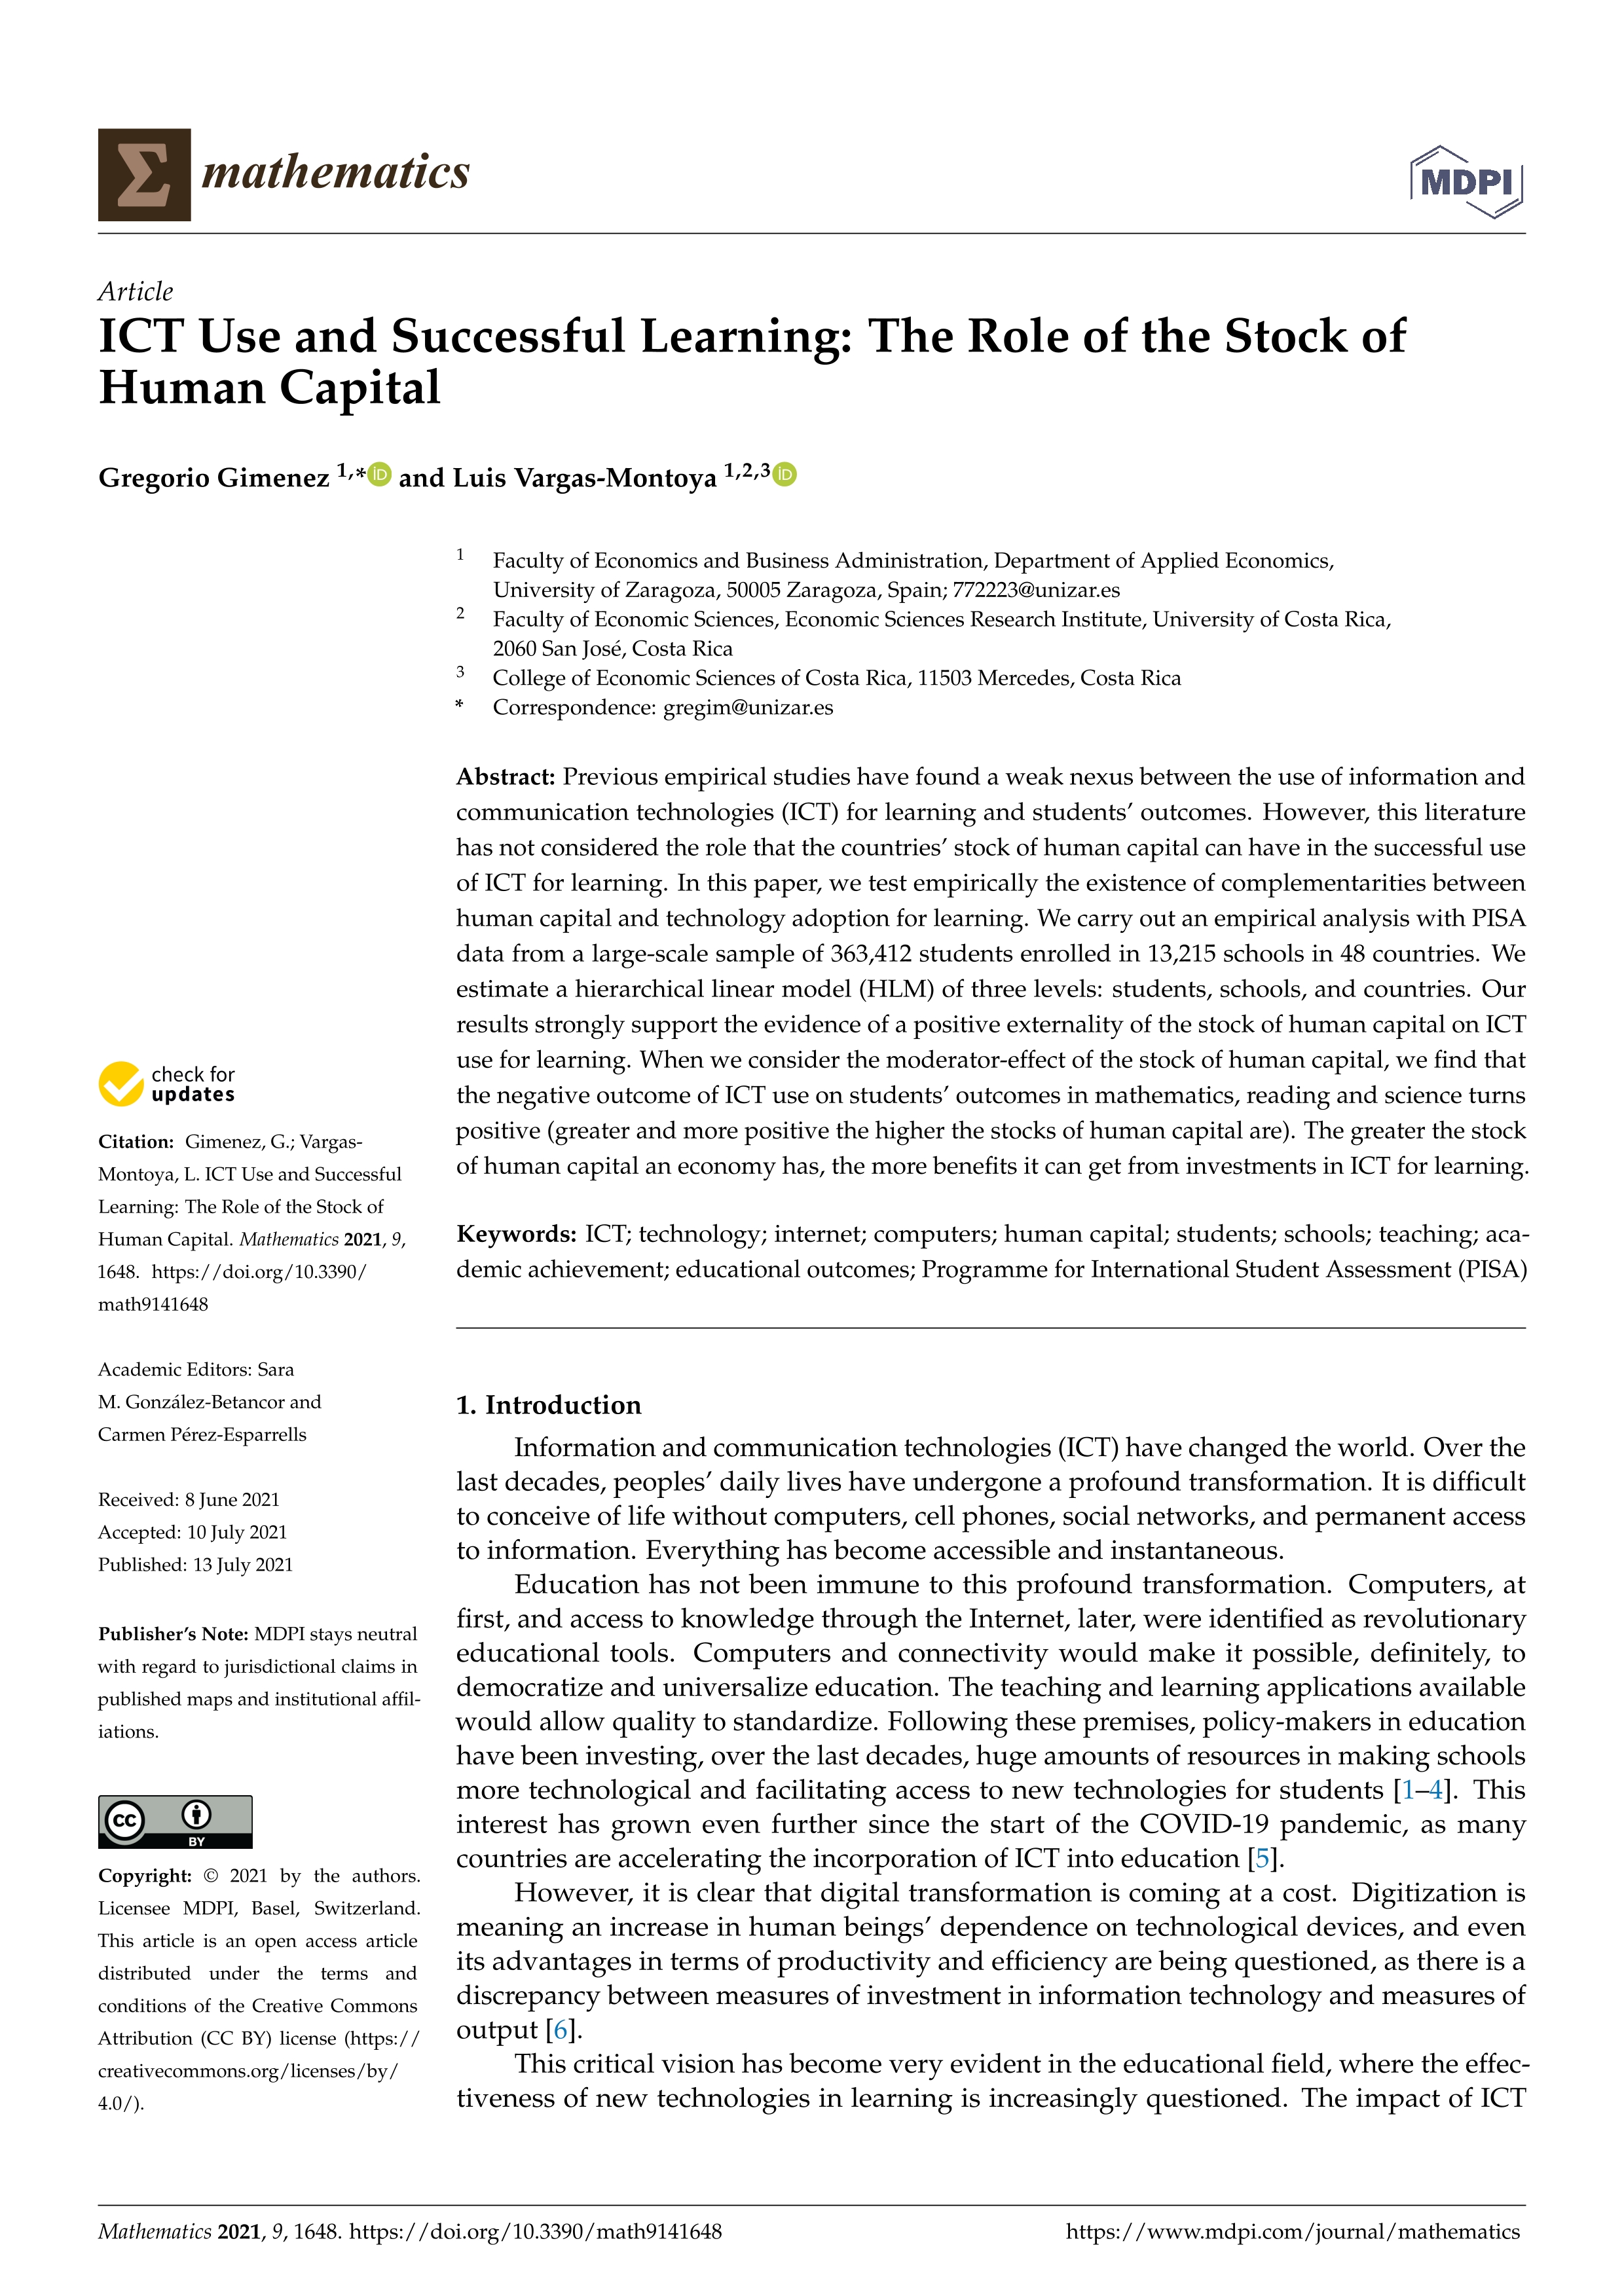 Ict use and successful learning: the role of the stock of human capital